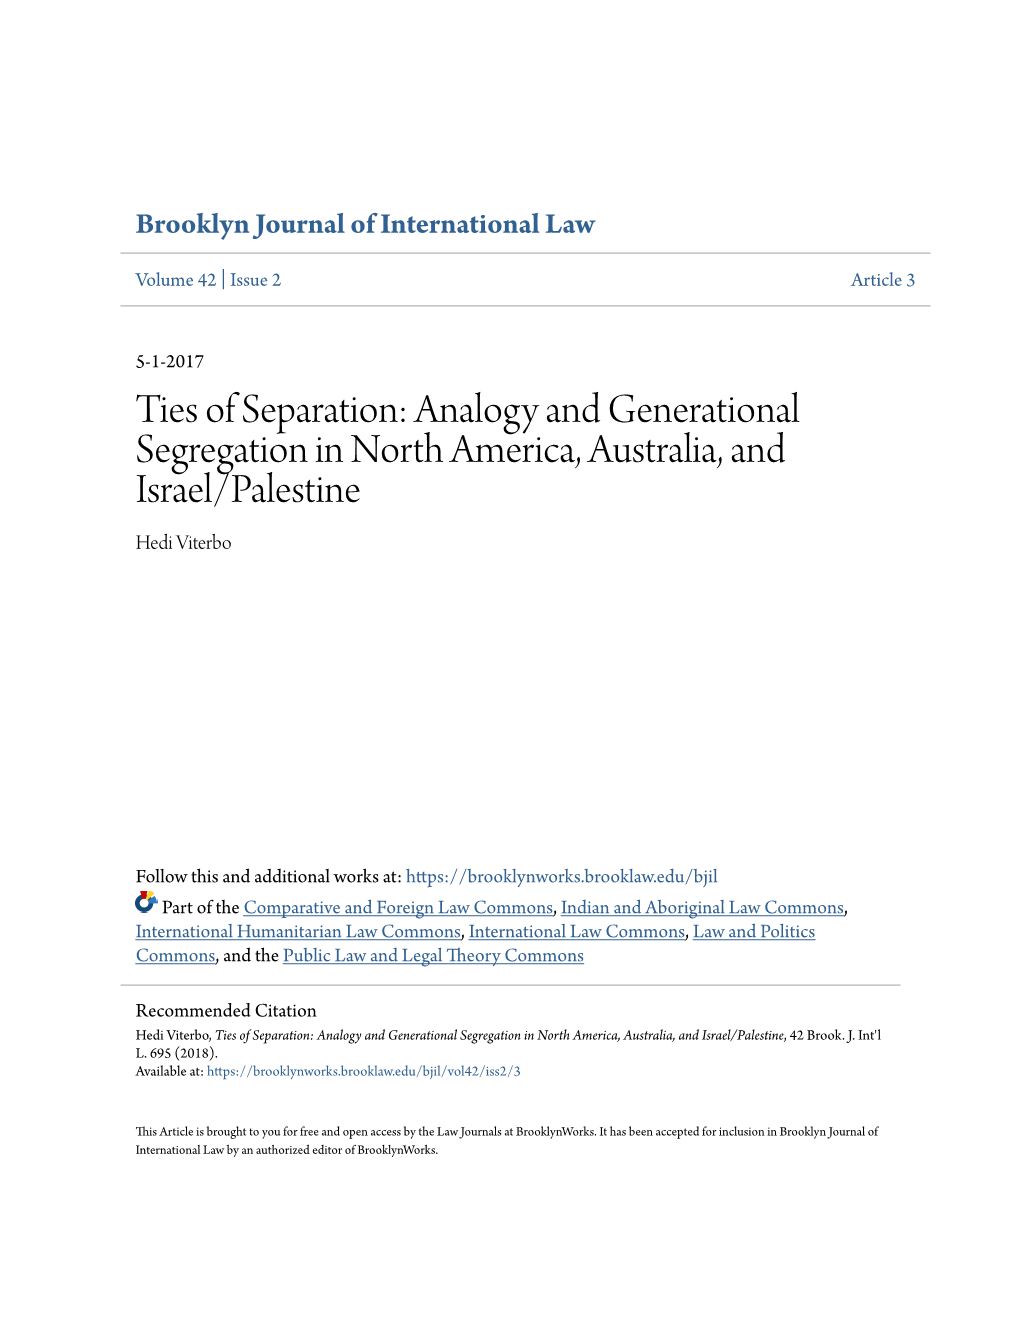 Ties of Separation: Analogy and Generational Segregation in North America, Australia, and Israel/Palestine Hedi Viterbo